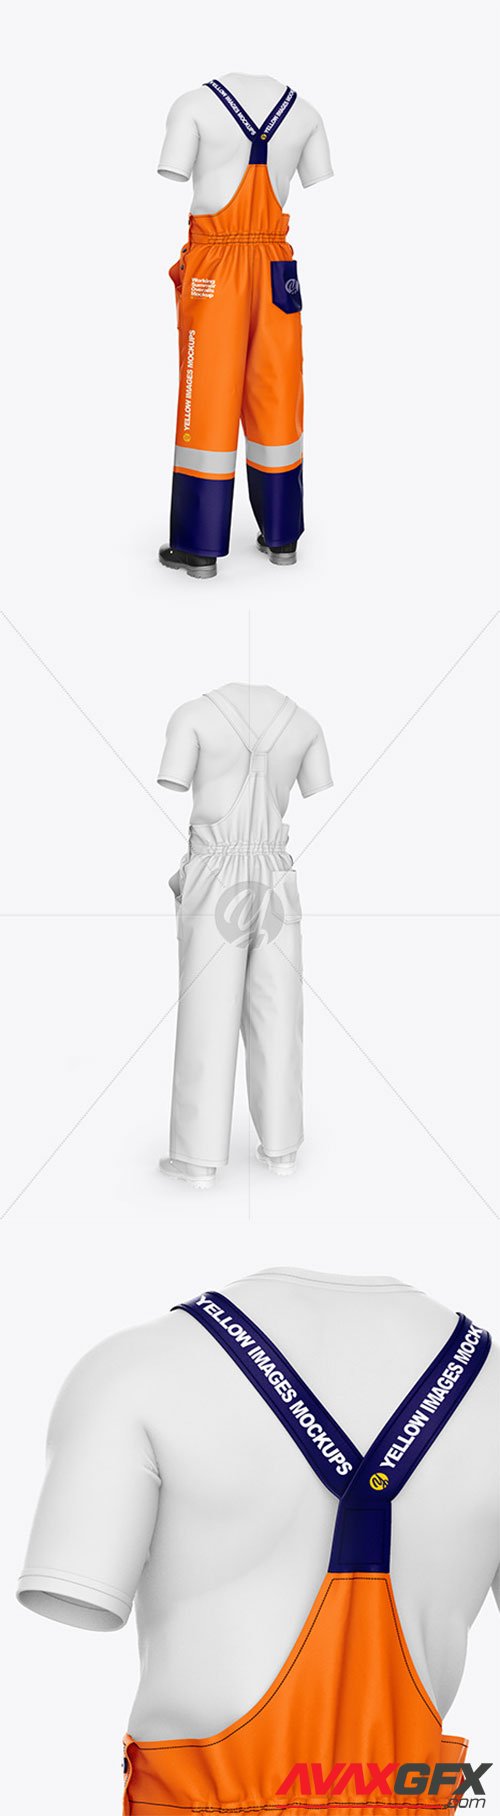 Working Overalls Mockup – Front Half Side View 58267 » AVAXGFX - All